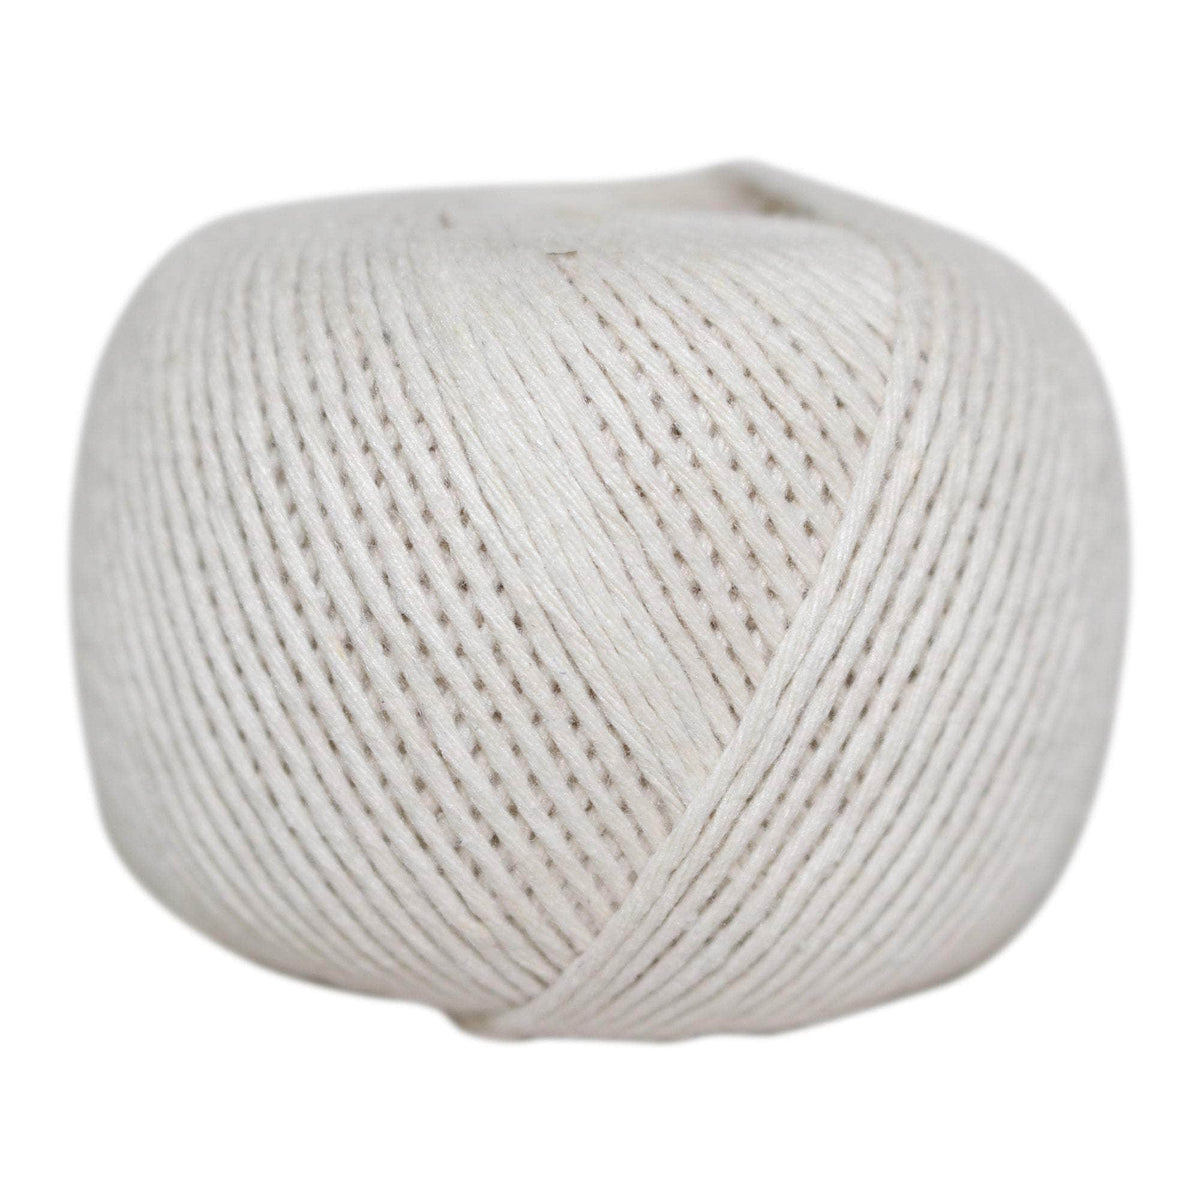 SGT KNOTS Cotton Sausage Twine - 100% All Natural Cotton String for  Wrapping Cuts, Tying Roasts, Food Packaging & More (840ft - 1 Pack, White)  price in UAE,  UAE